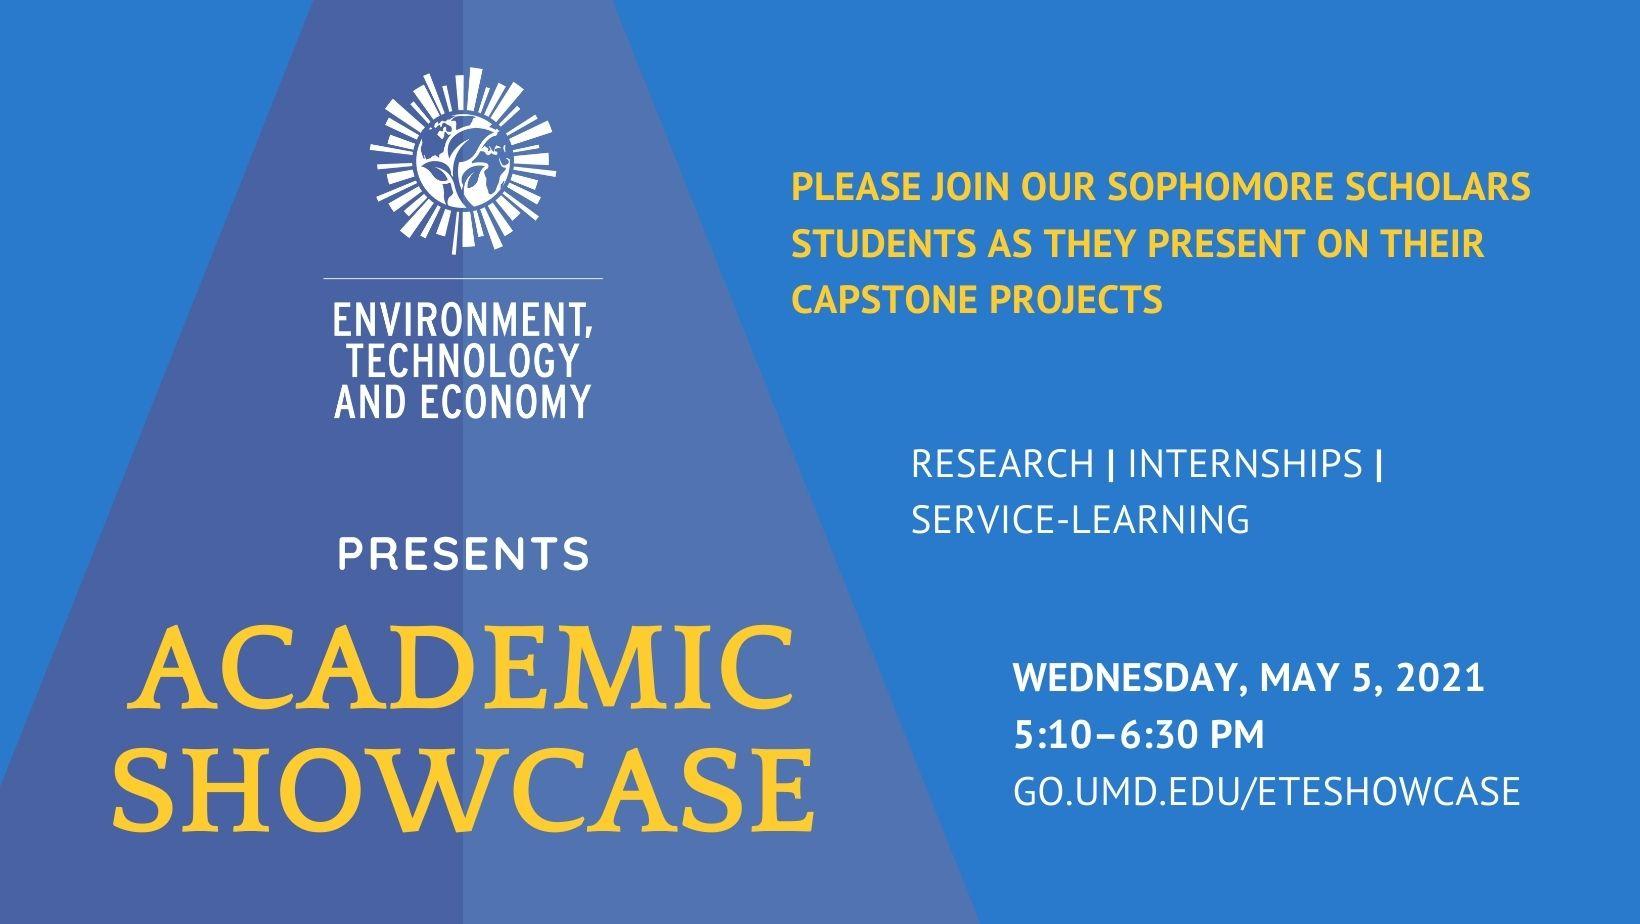 Join ETE's Academic Showcase on Wednesday, May 5, from 5:10 to 6:30 p.m.